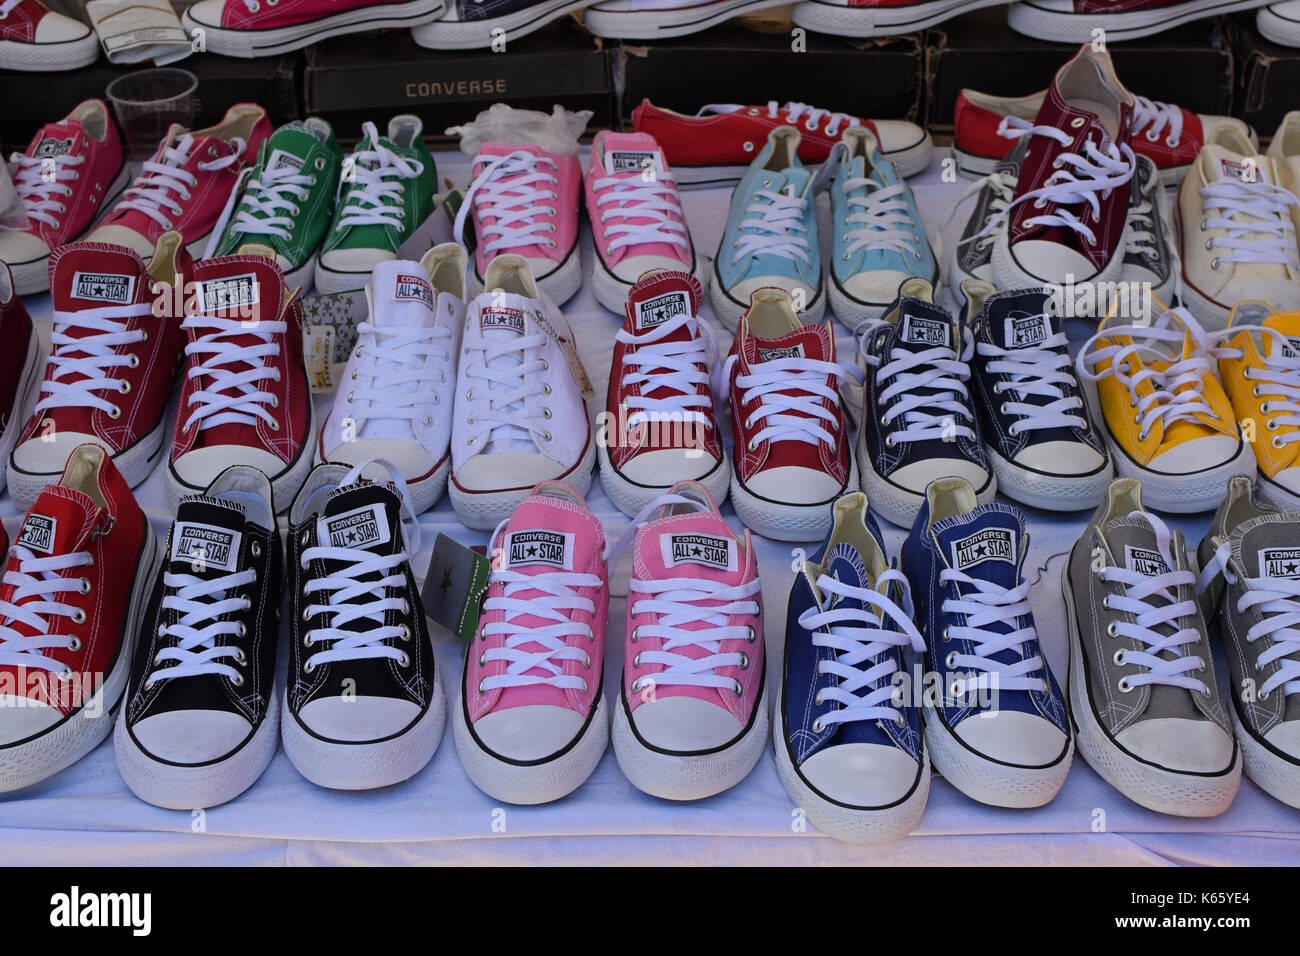 ATHENS, GREECE - AUGUST 15, 2016: Converse all star casual shoes colorful  sports sneakers for sale Stock Photo - Alamy